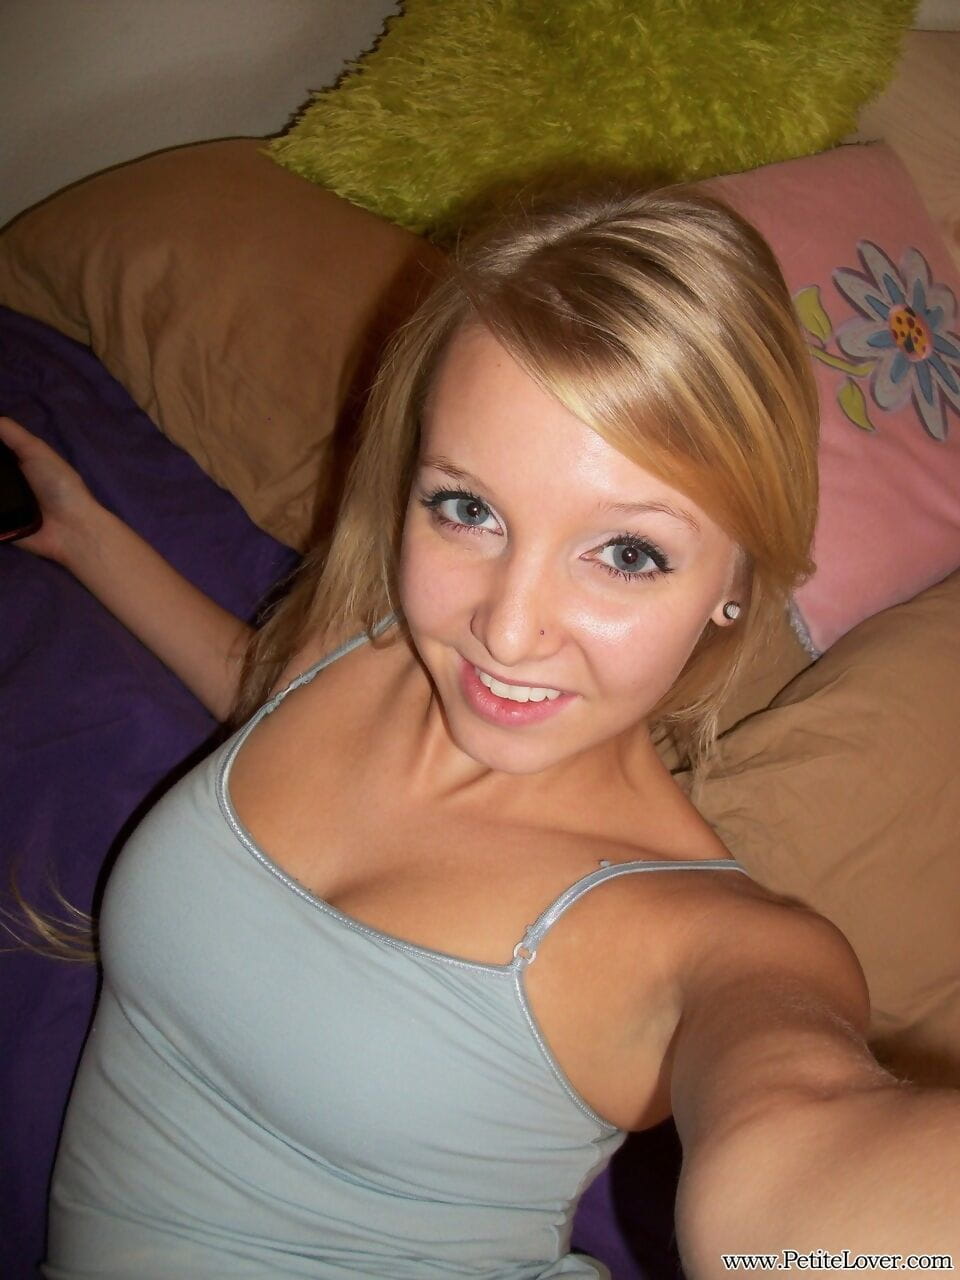 Cute teen girl with blonde hair displays her hairless pussy on her bed page 1